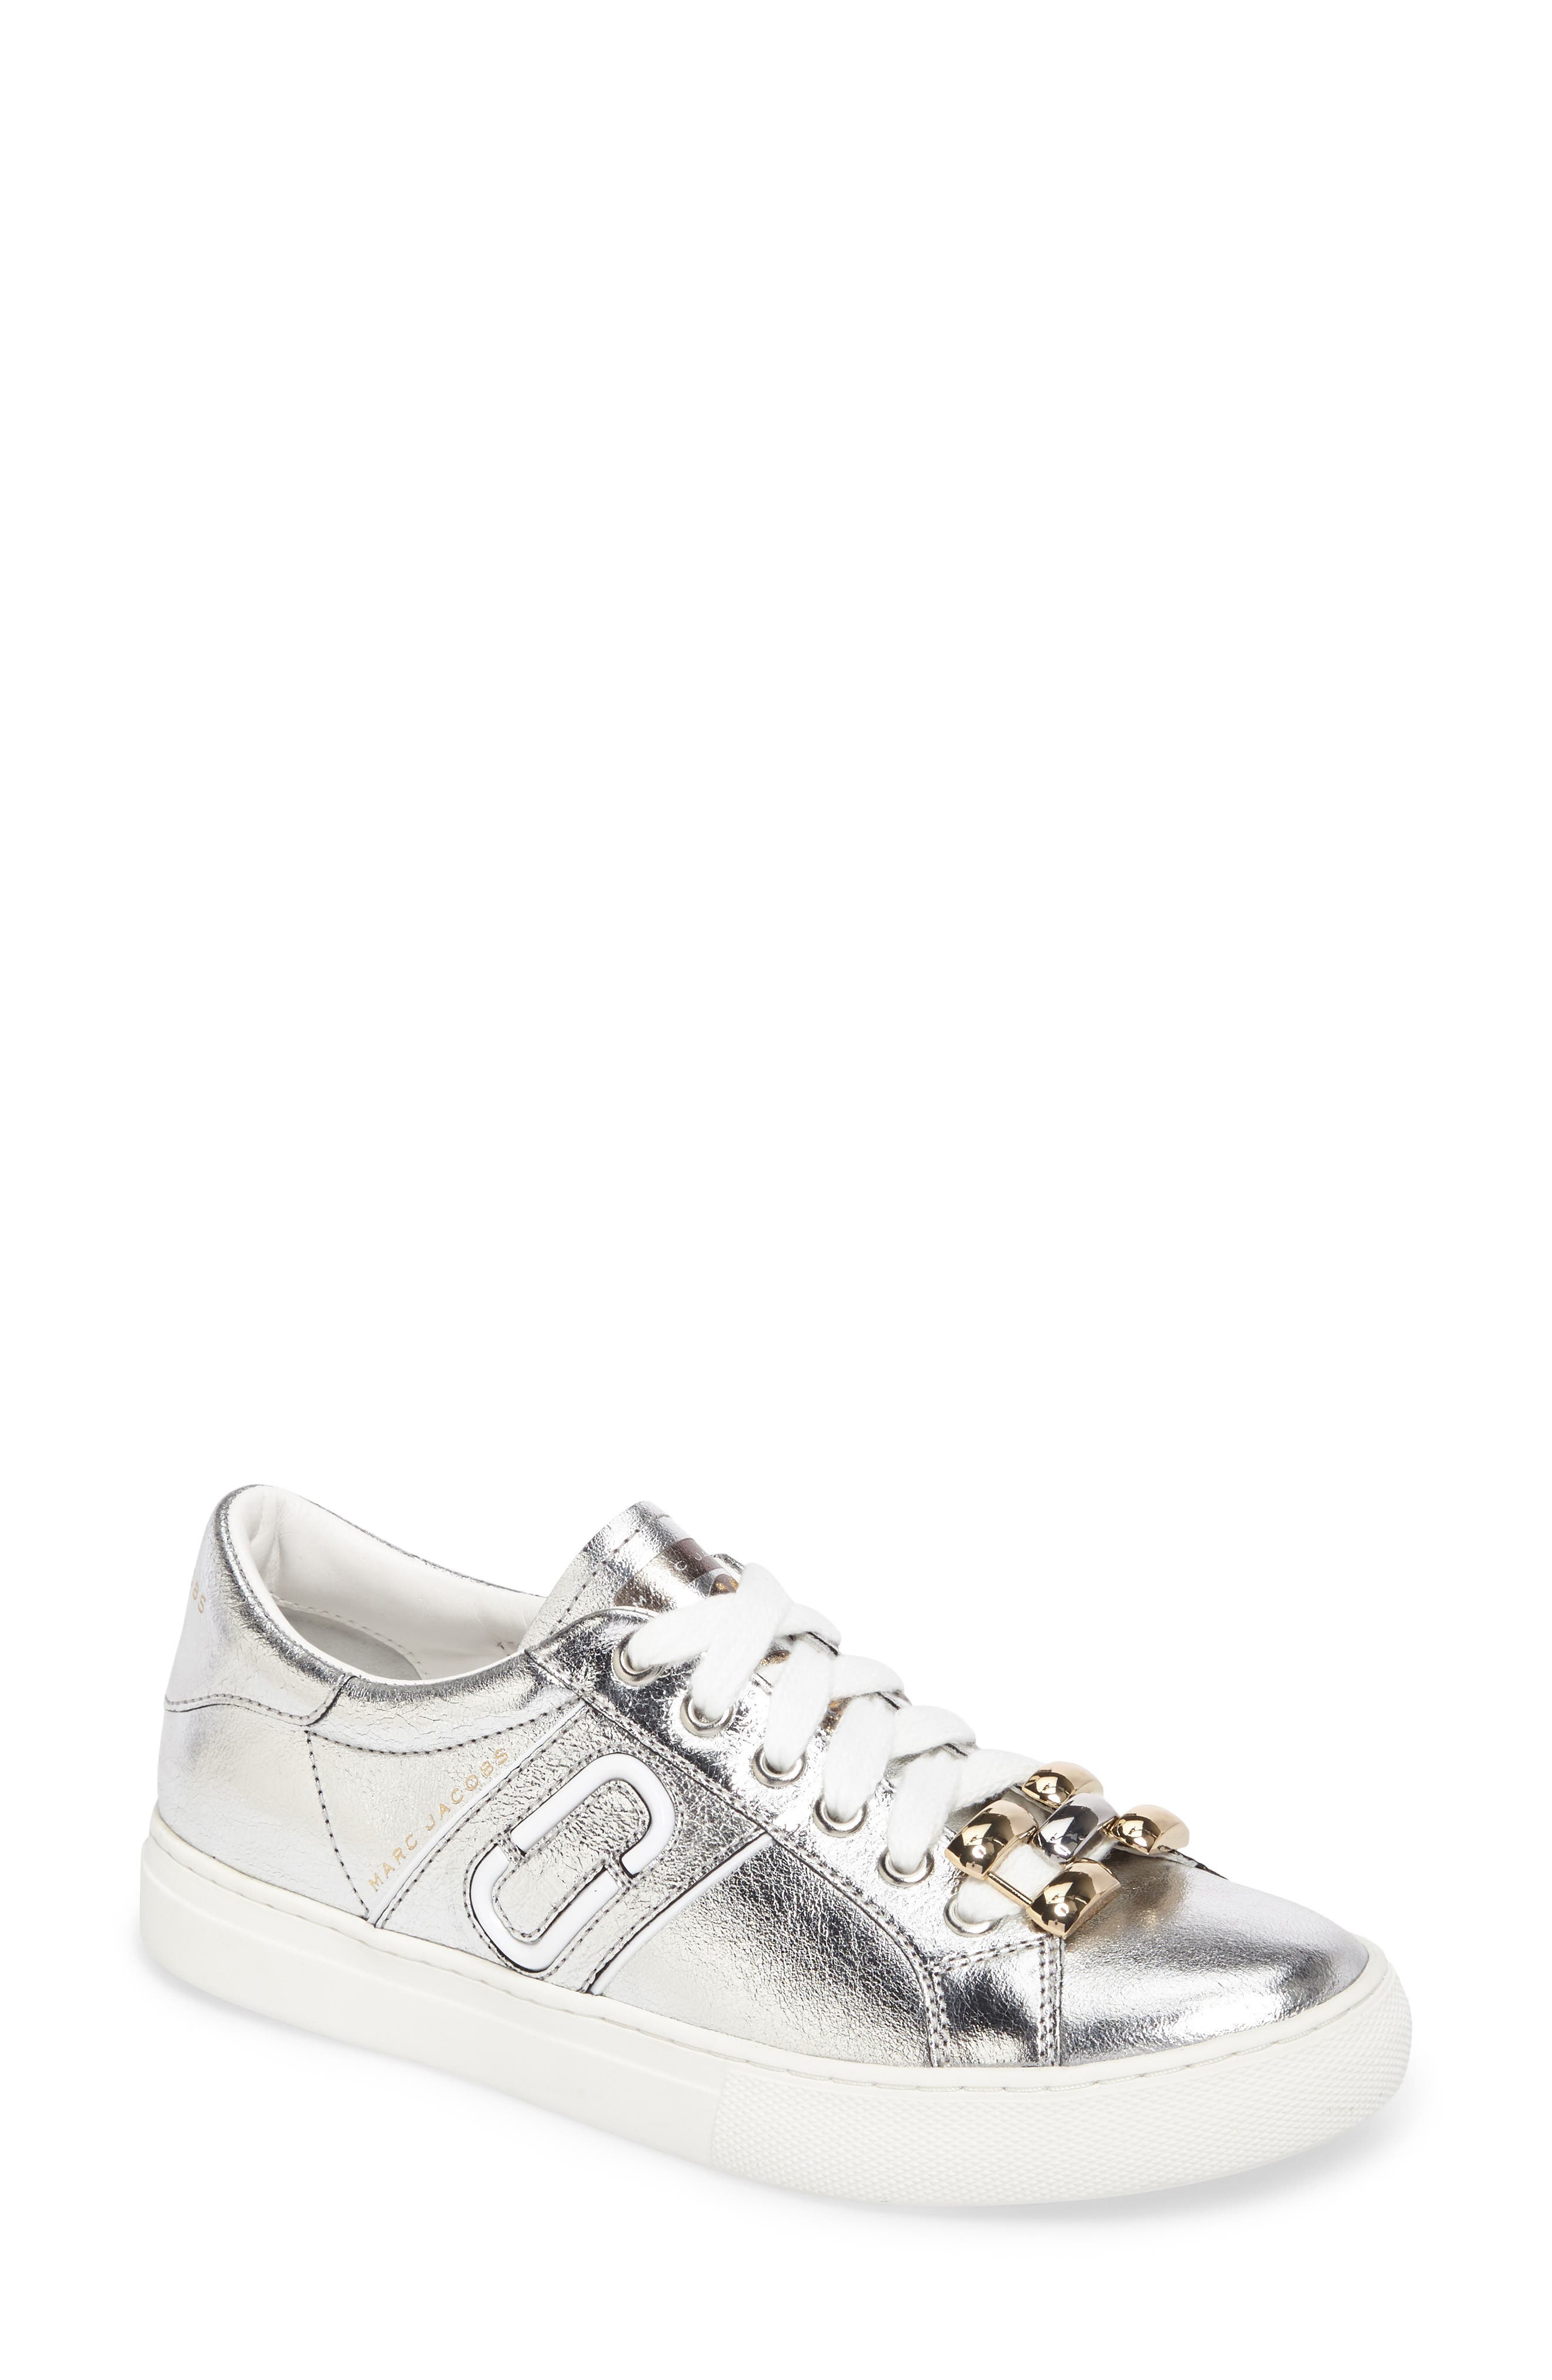 marc jacobs silver sneakers